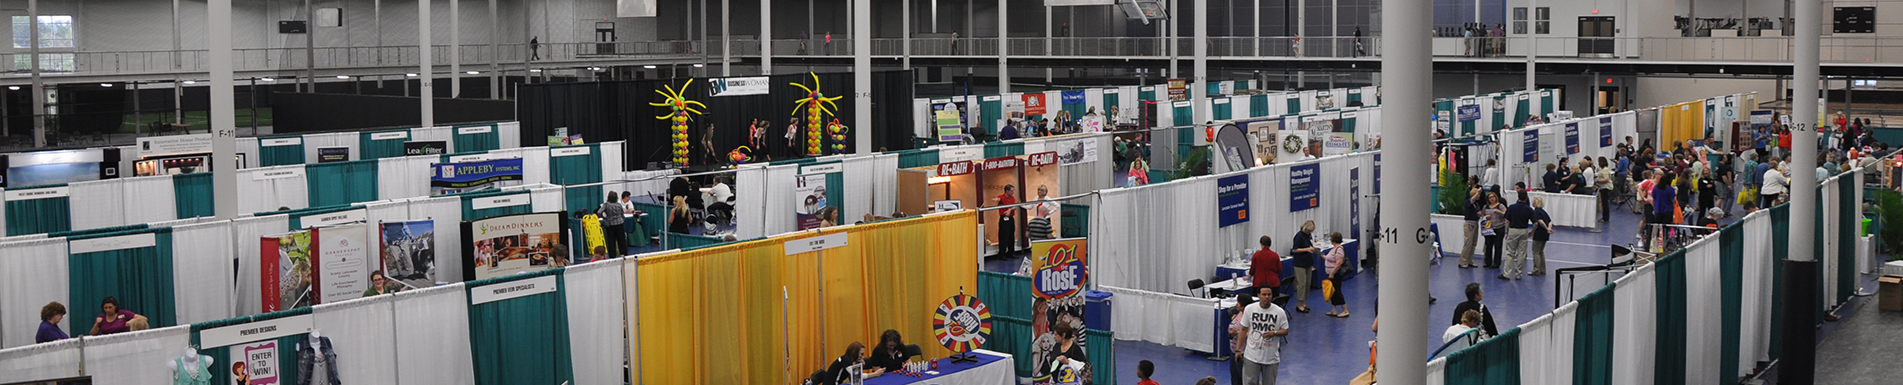 Conventions and trade shows